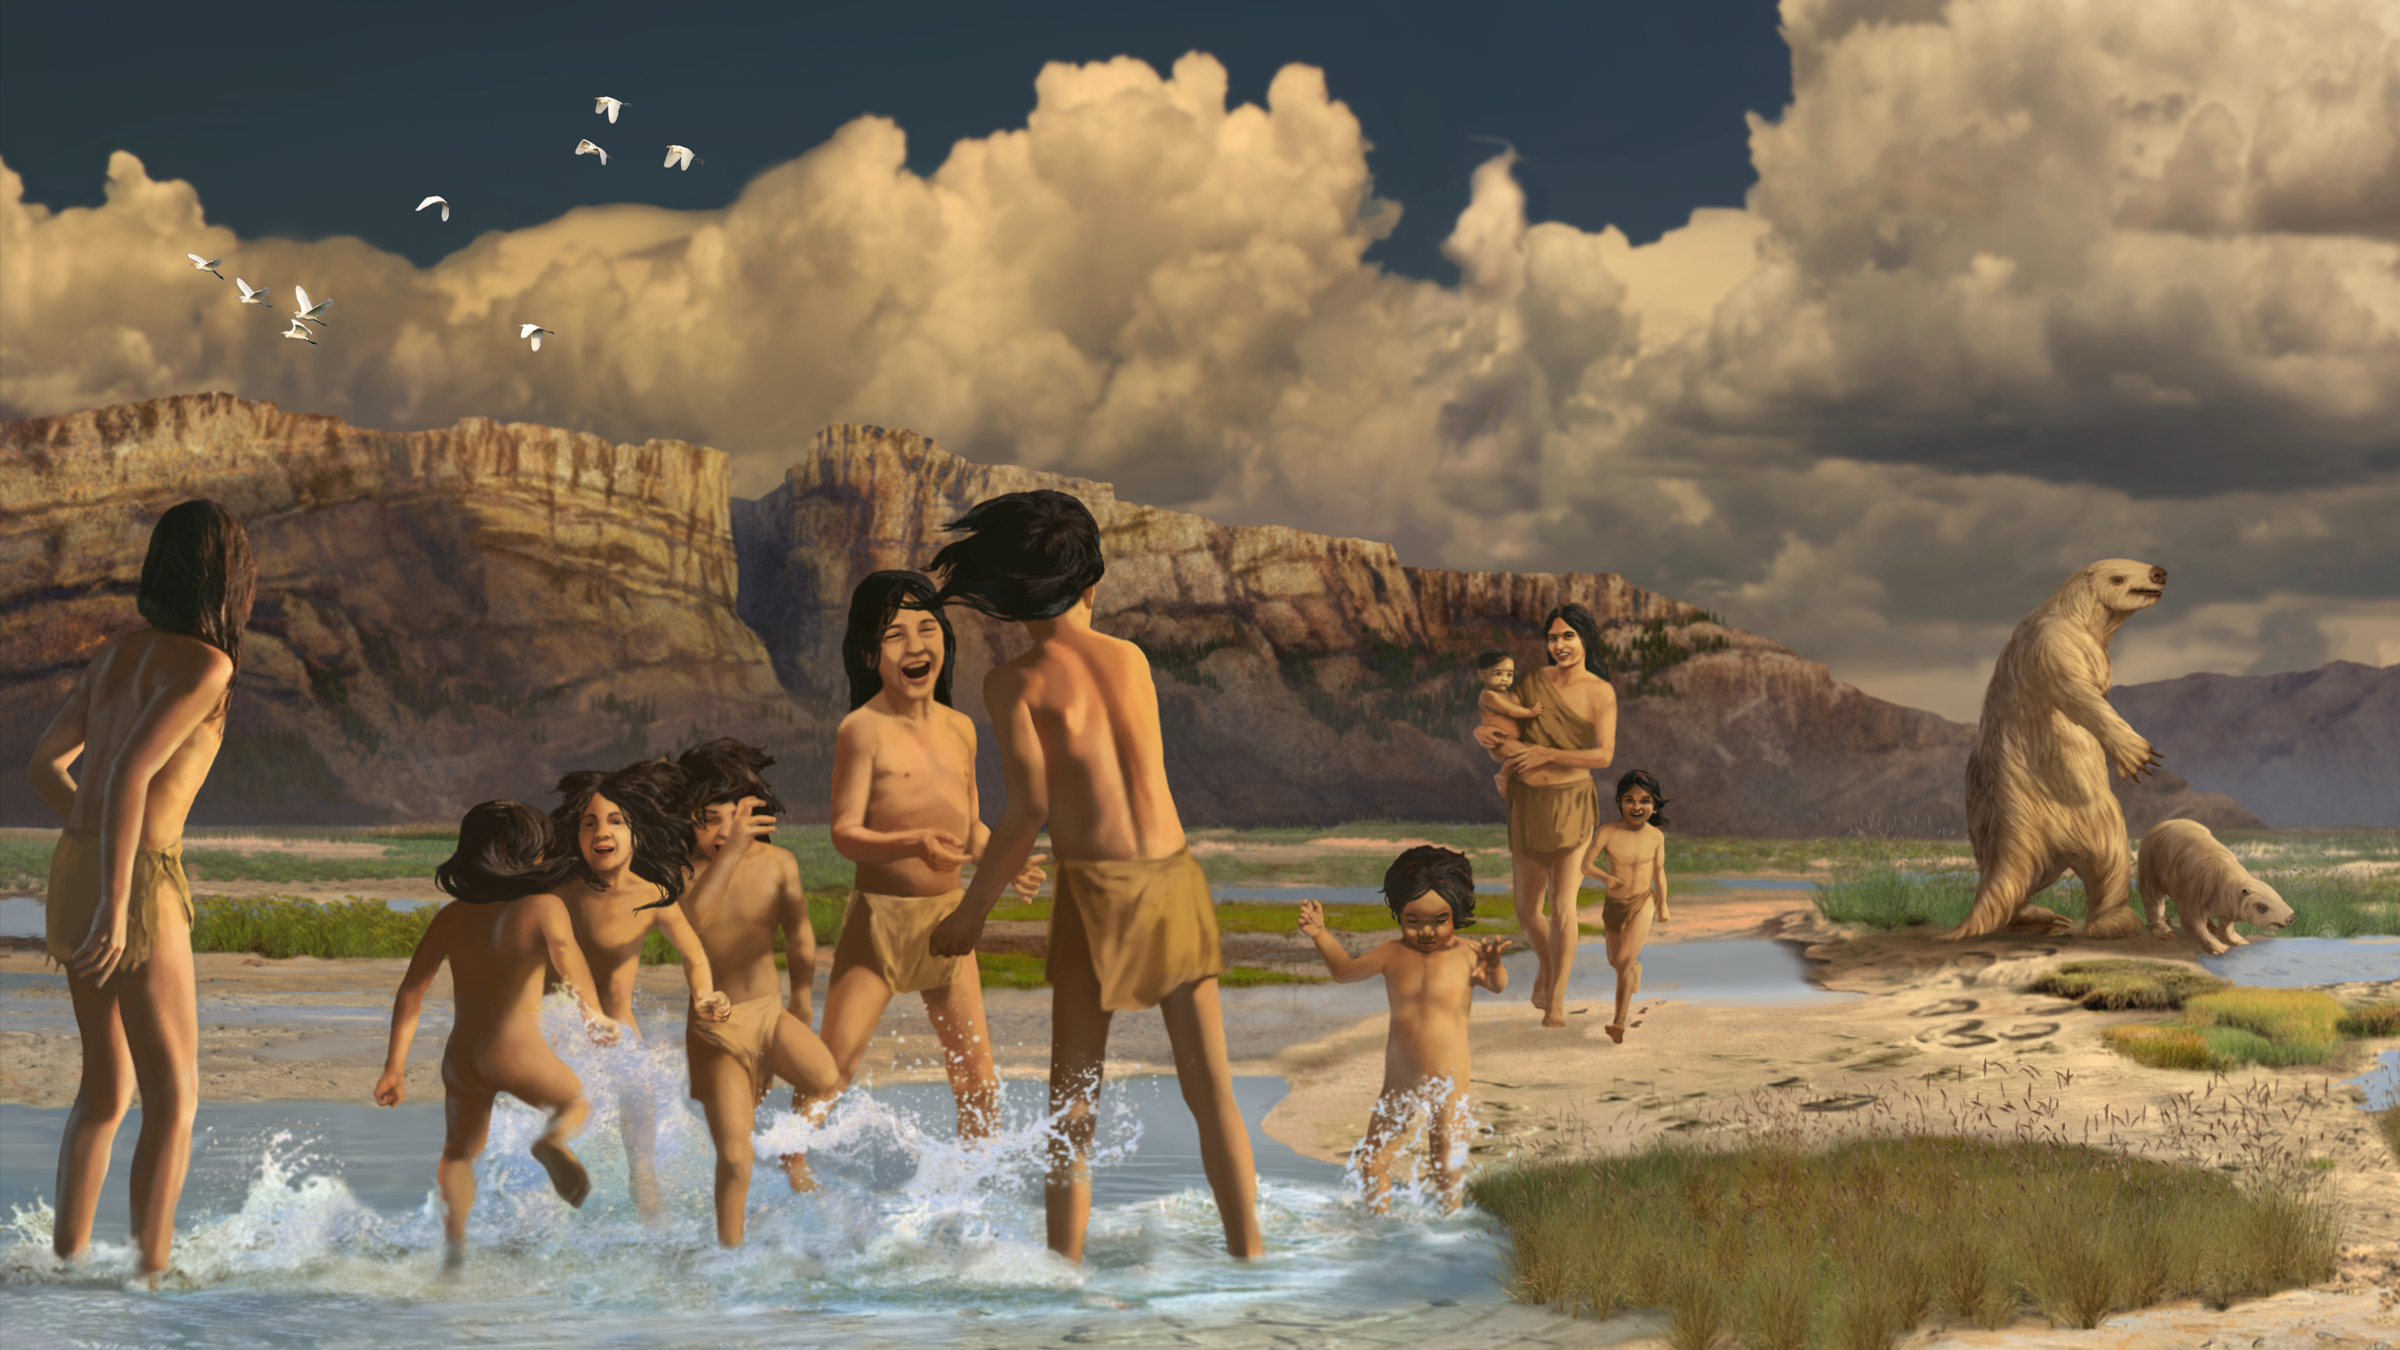 An illustration of children from the last ice age splashing in puddles on a ground sloth trackway in what is now New Mexico.